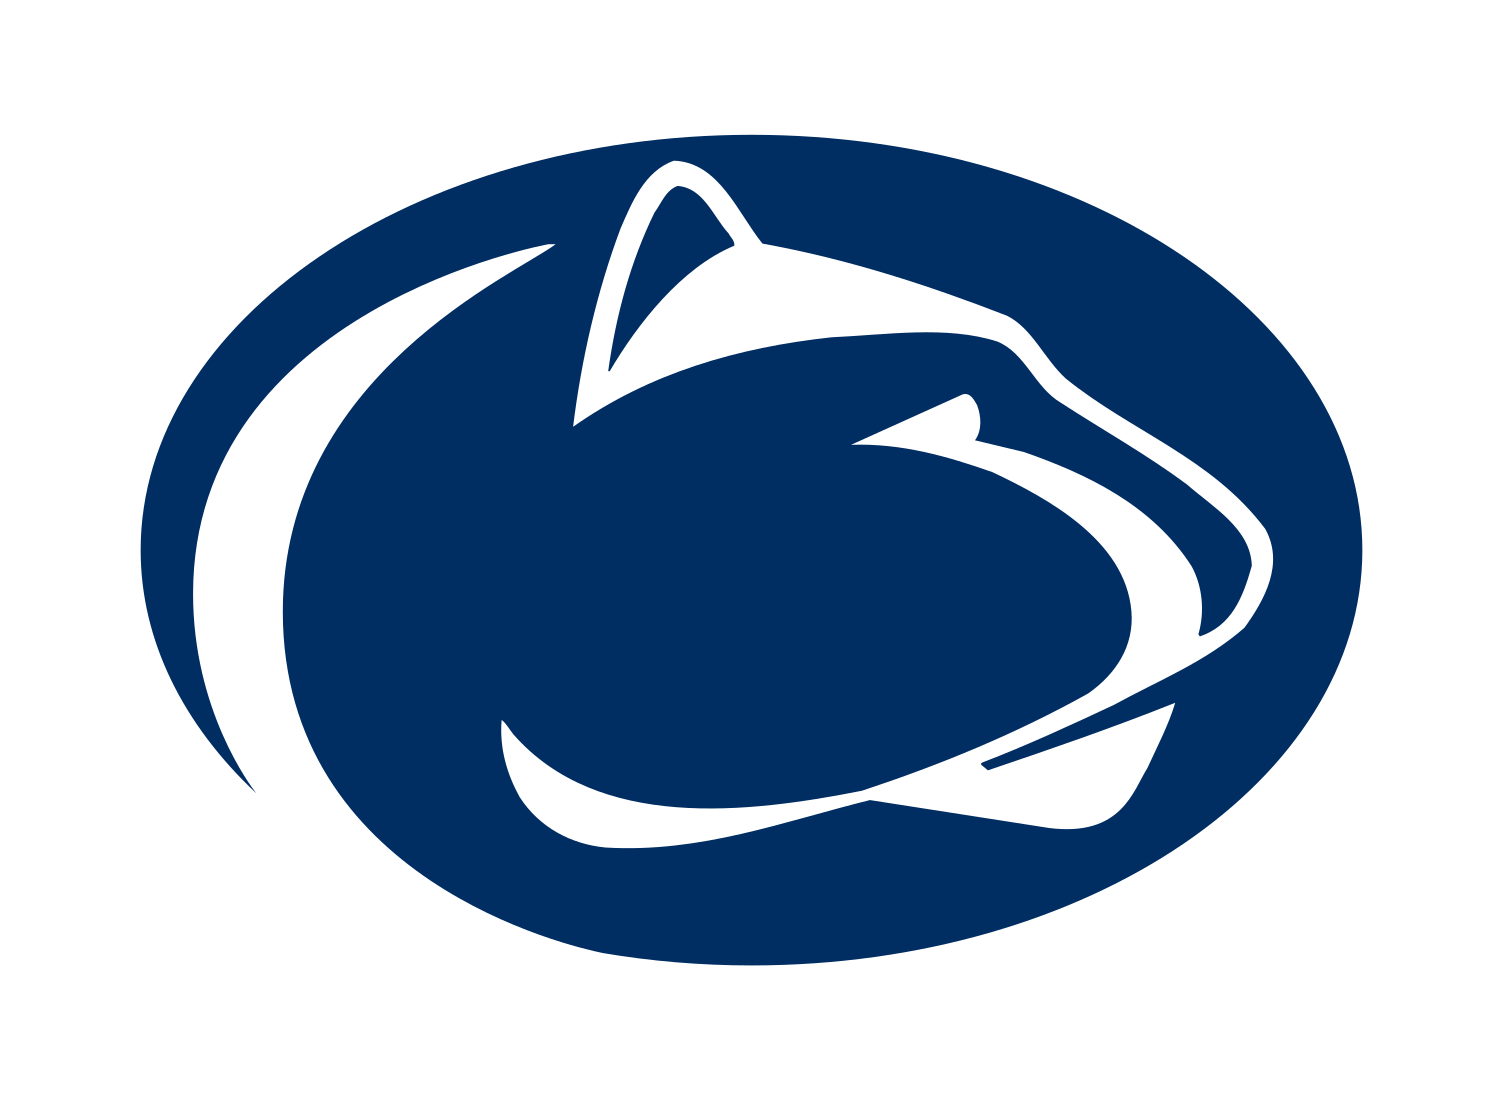 image of the Penn State logo